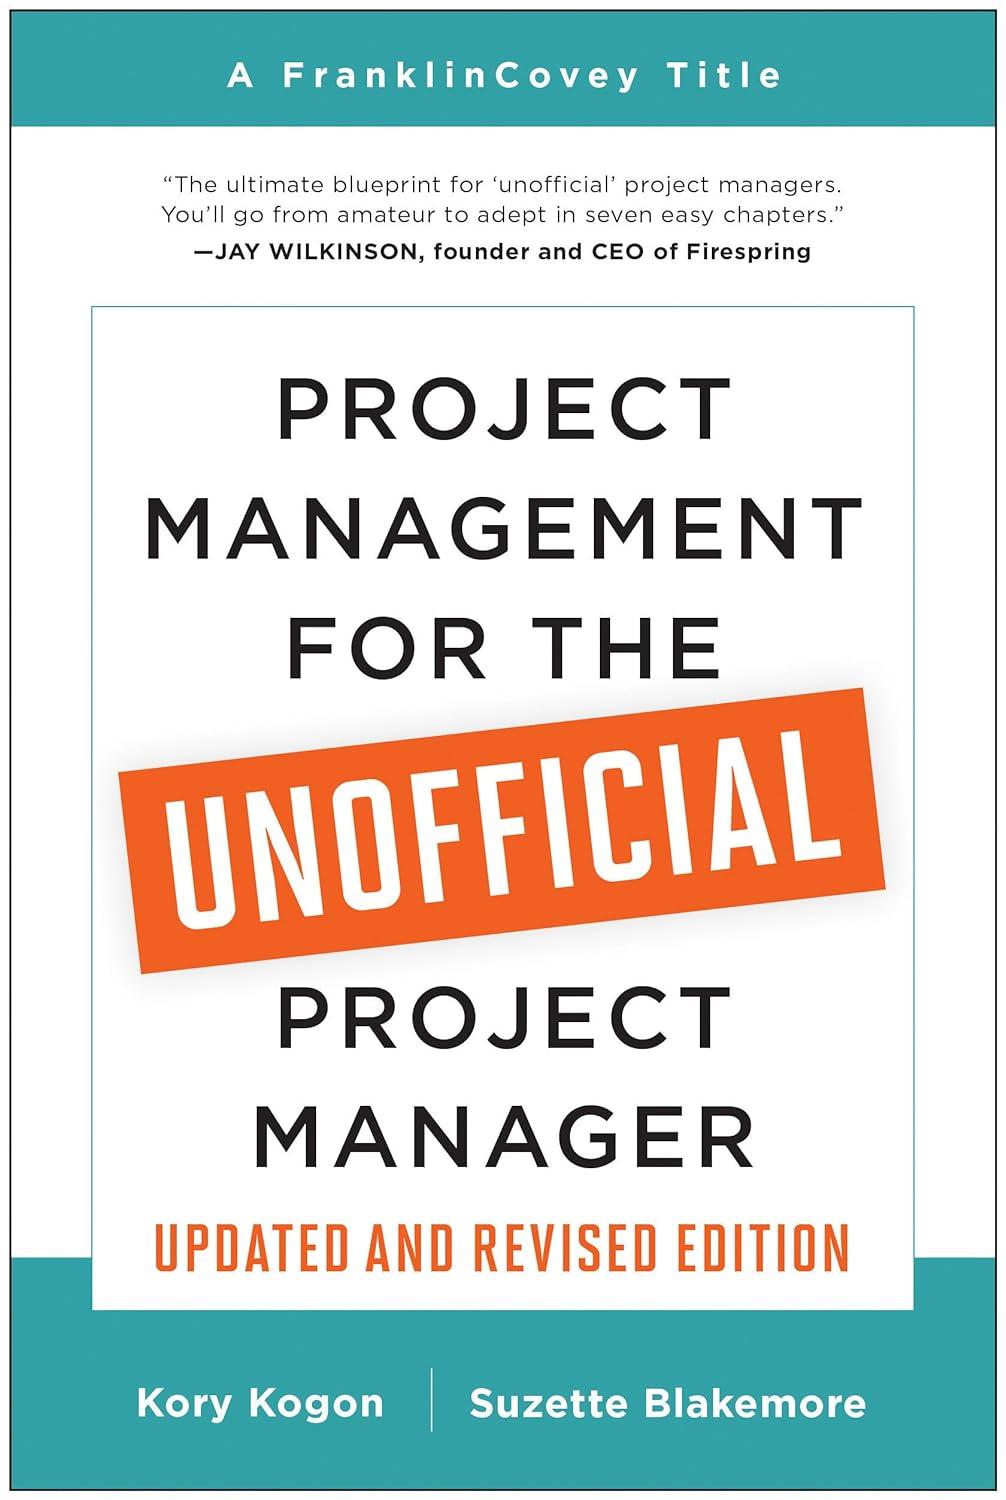 project management for the unofficial project manager 1st updated edition by kory kogon, suzette blakemore